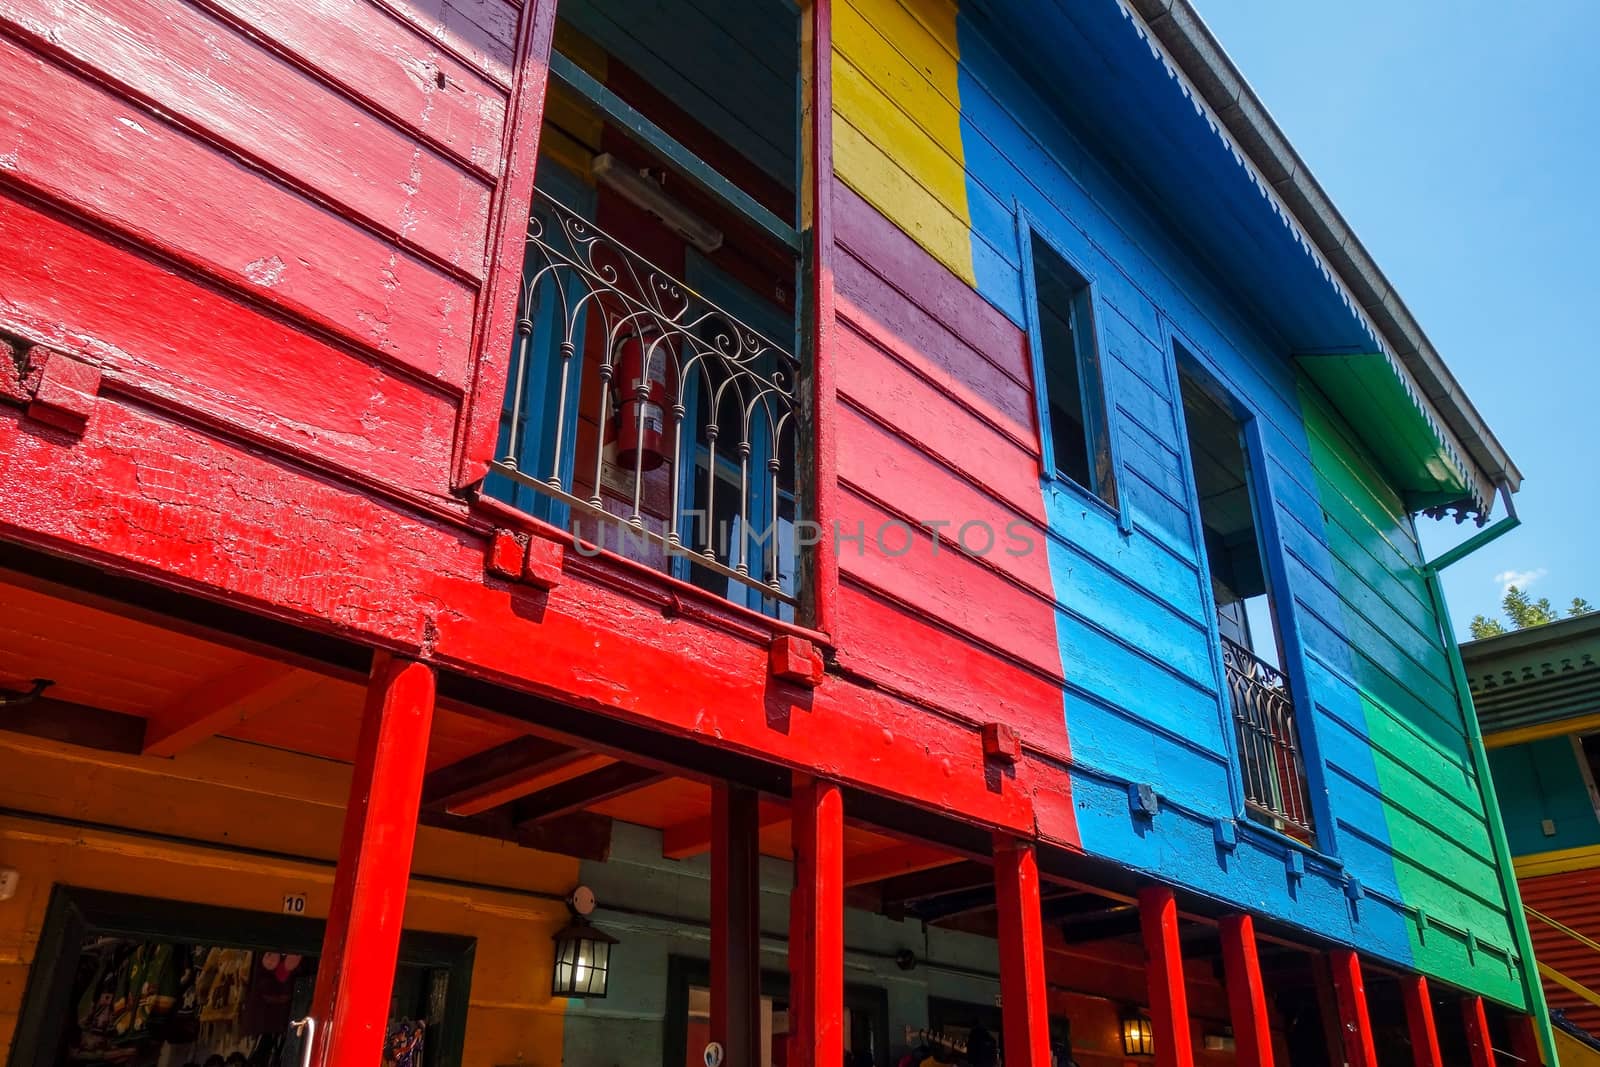 Colorful houses in Caminito, Buenos Aires by daboost